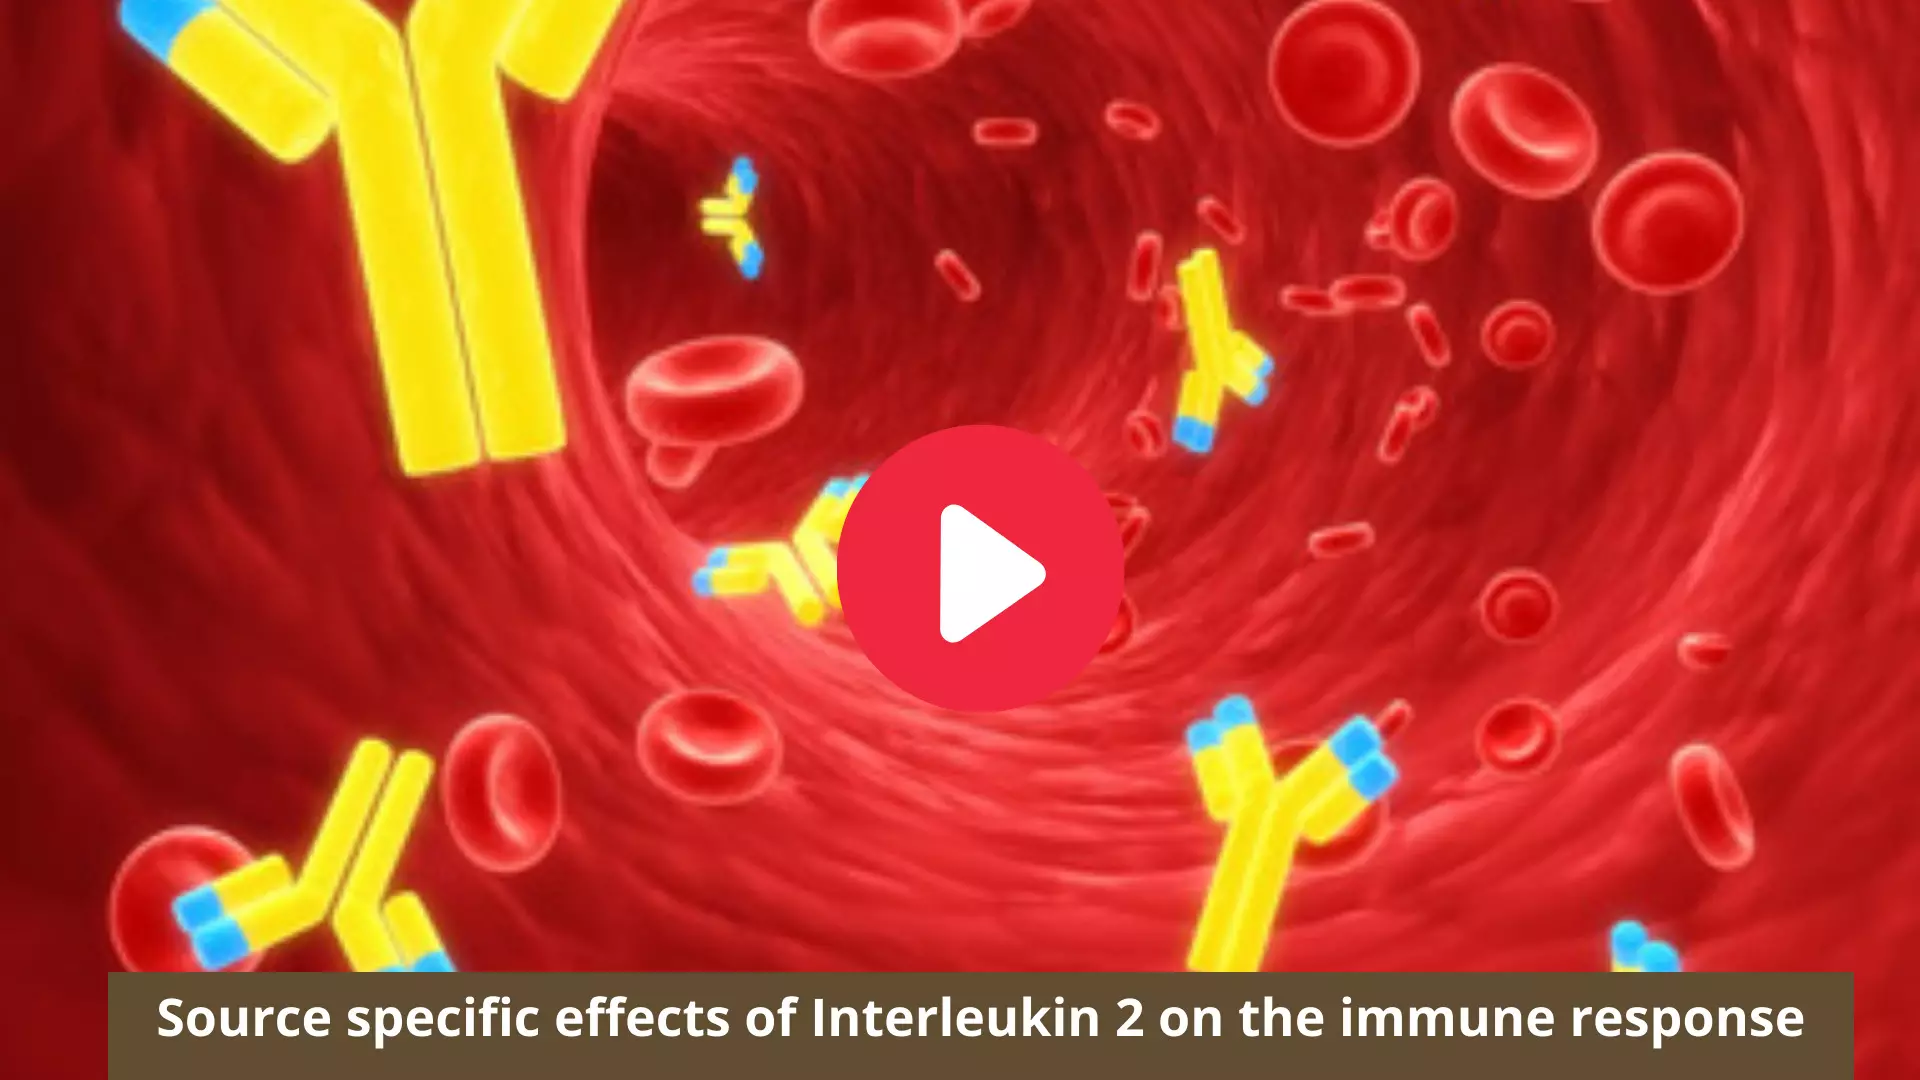 Source specific effects of Interleukin 2 on the immune response